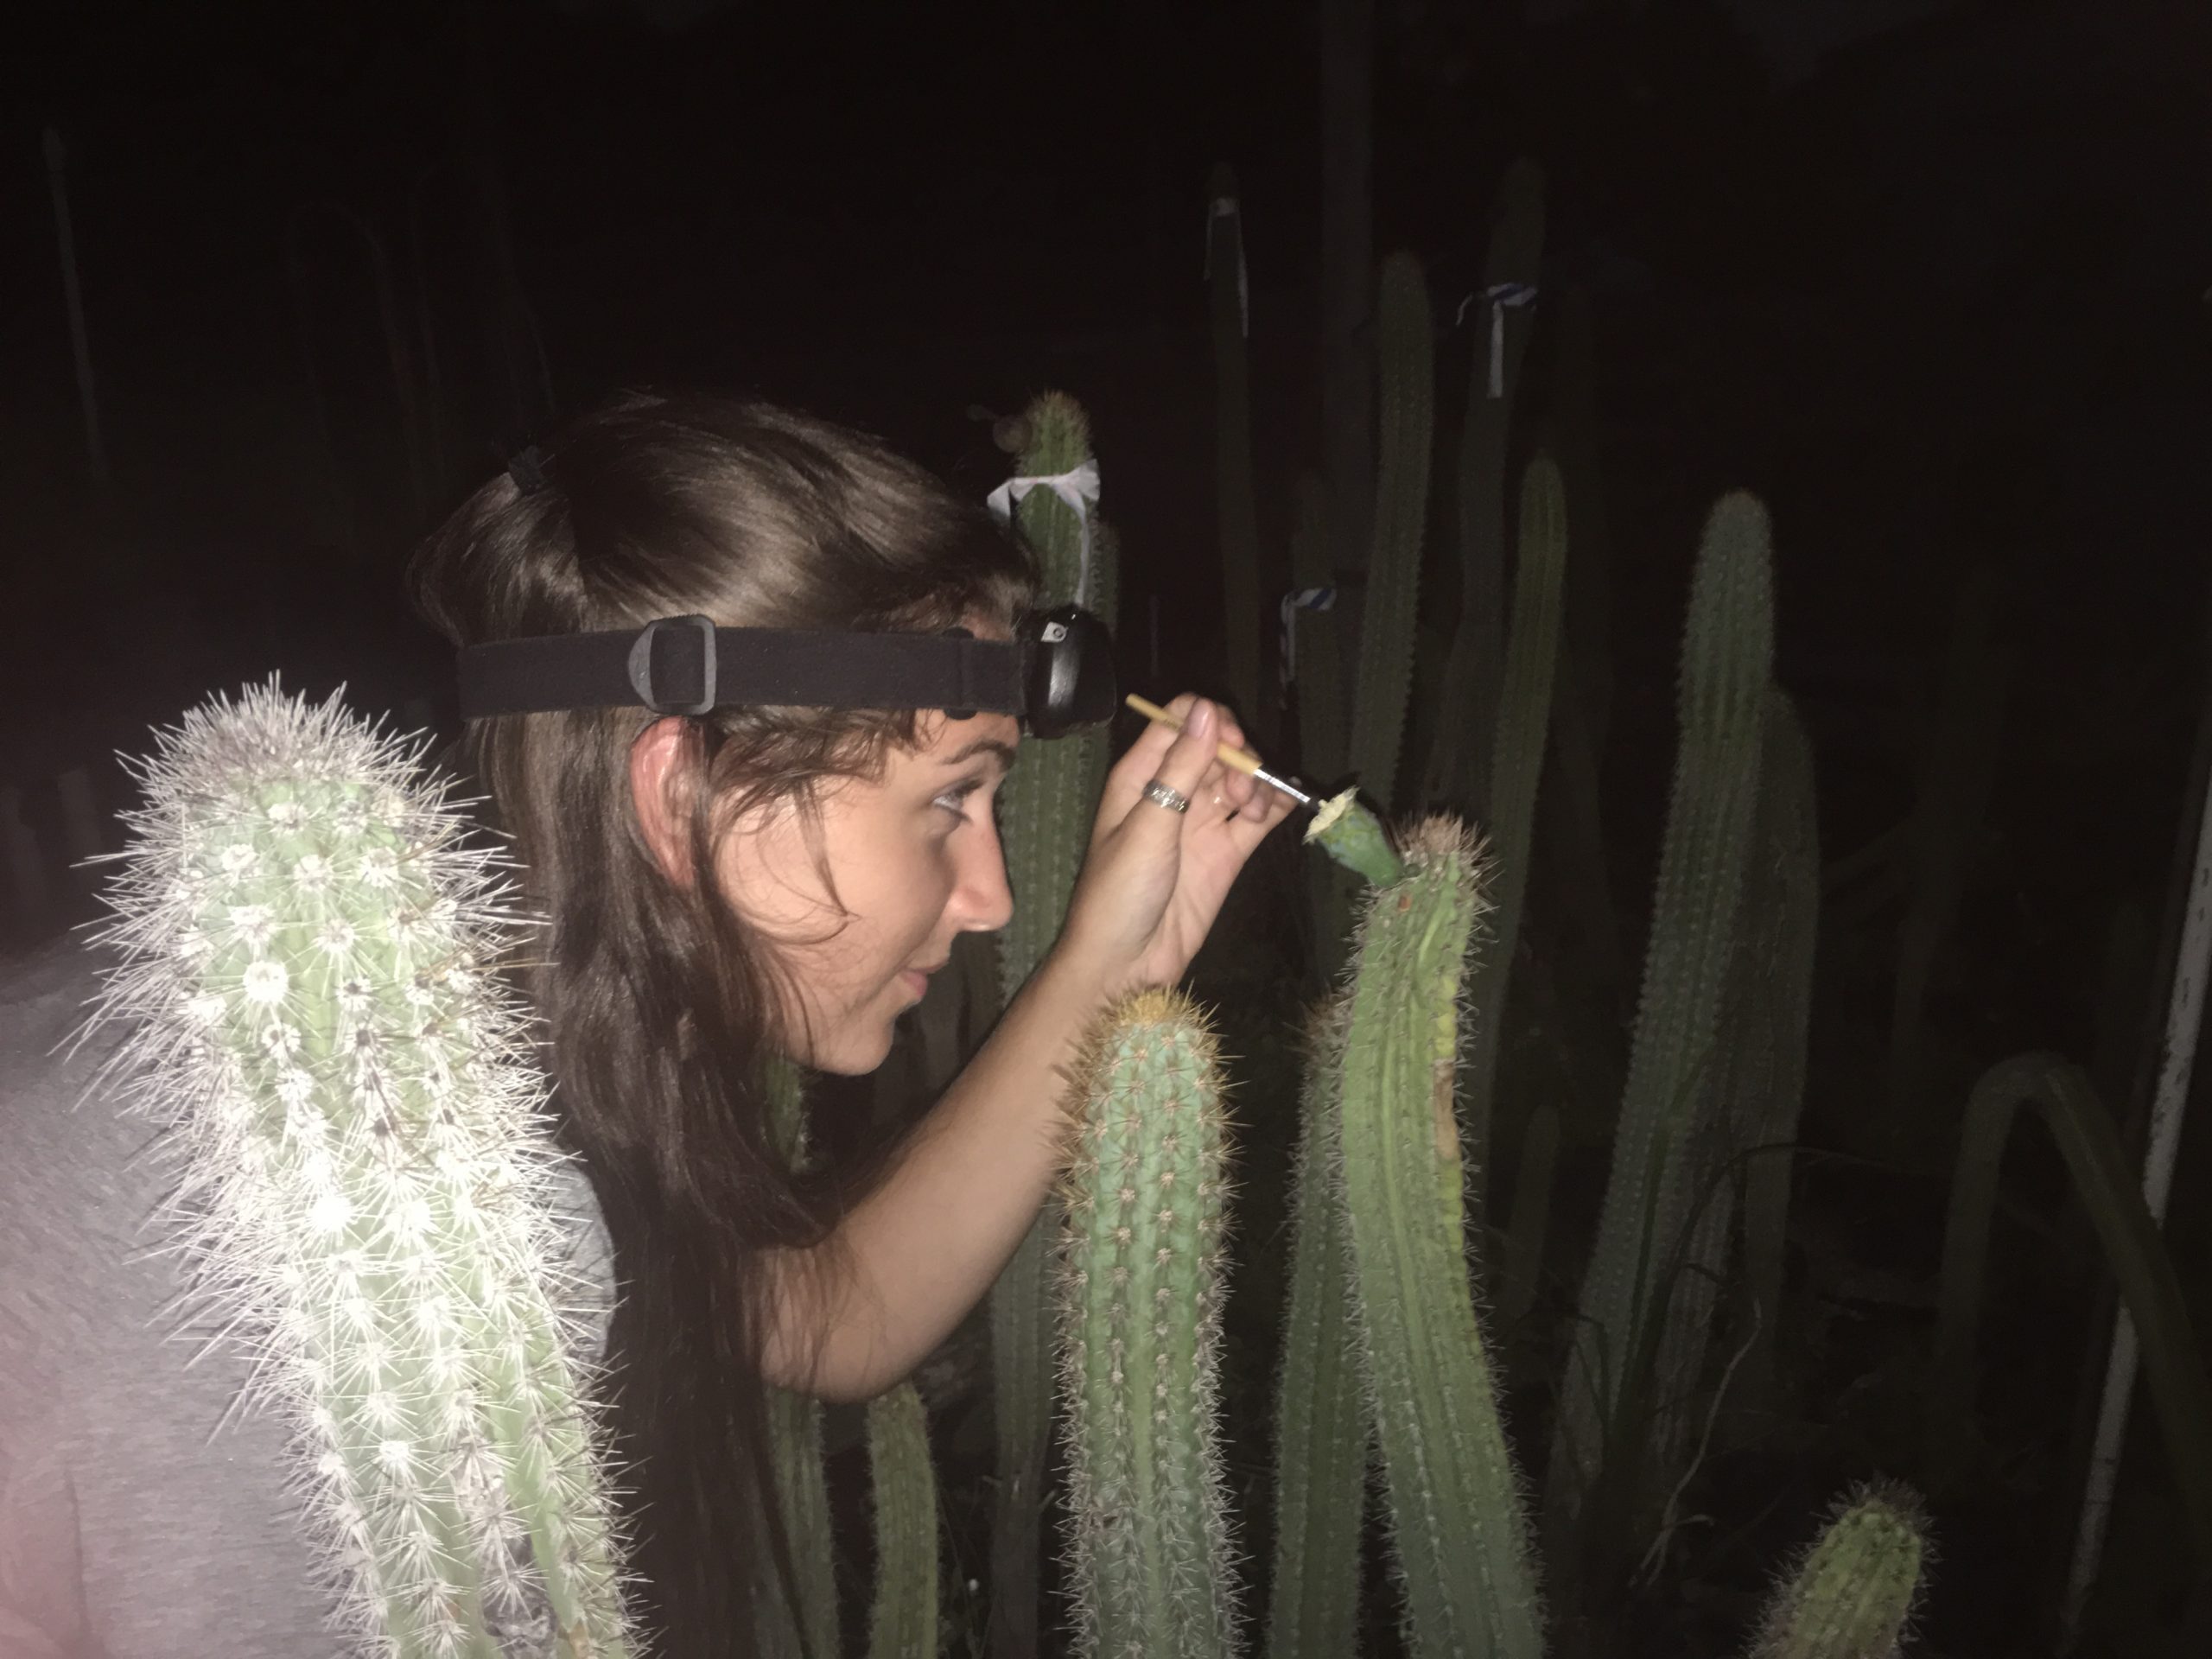 Image of woman hand pollinating a cactus flower.